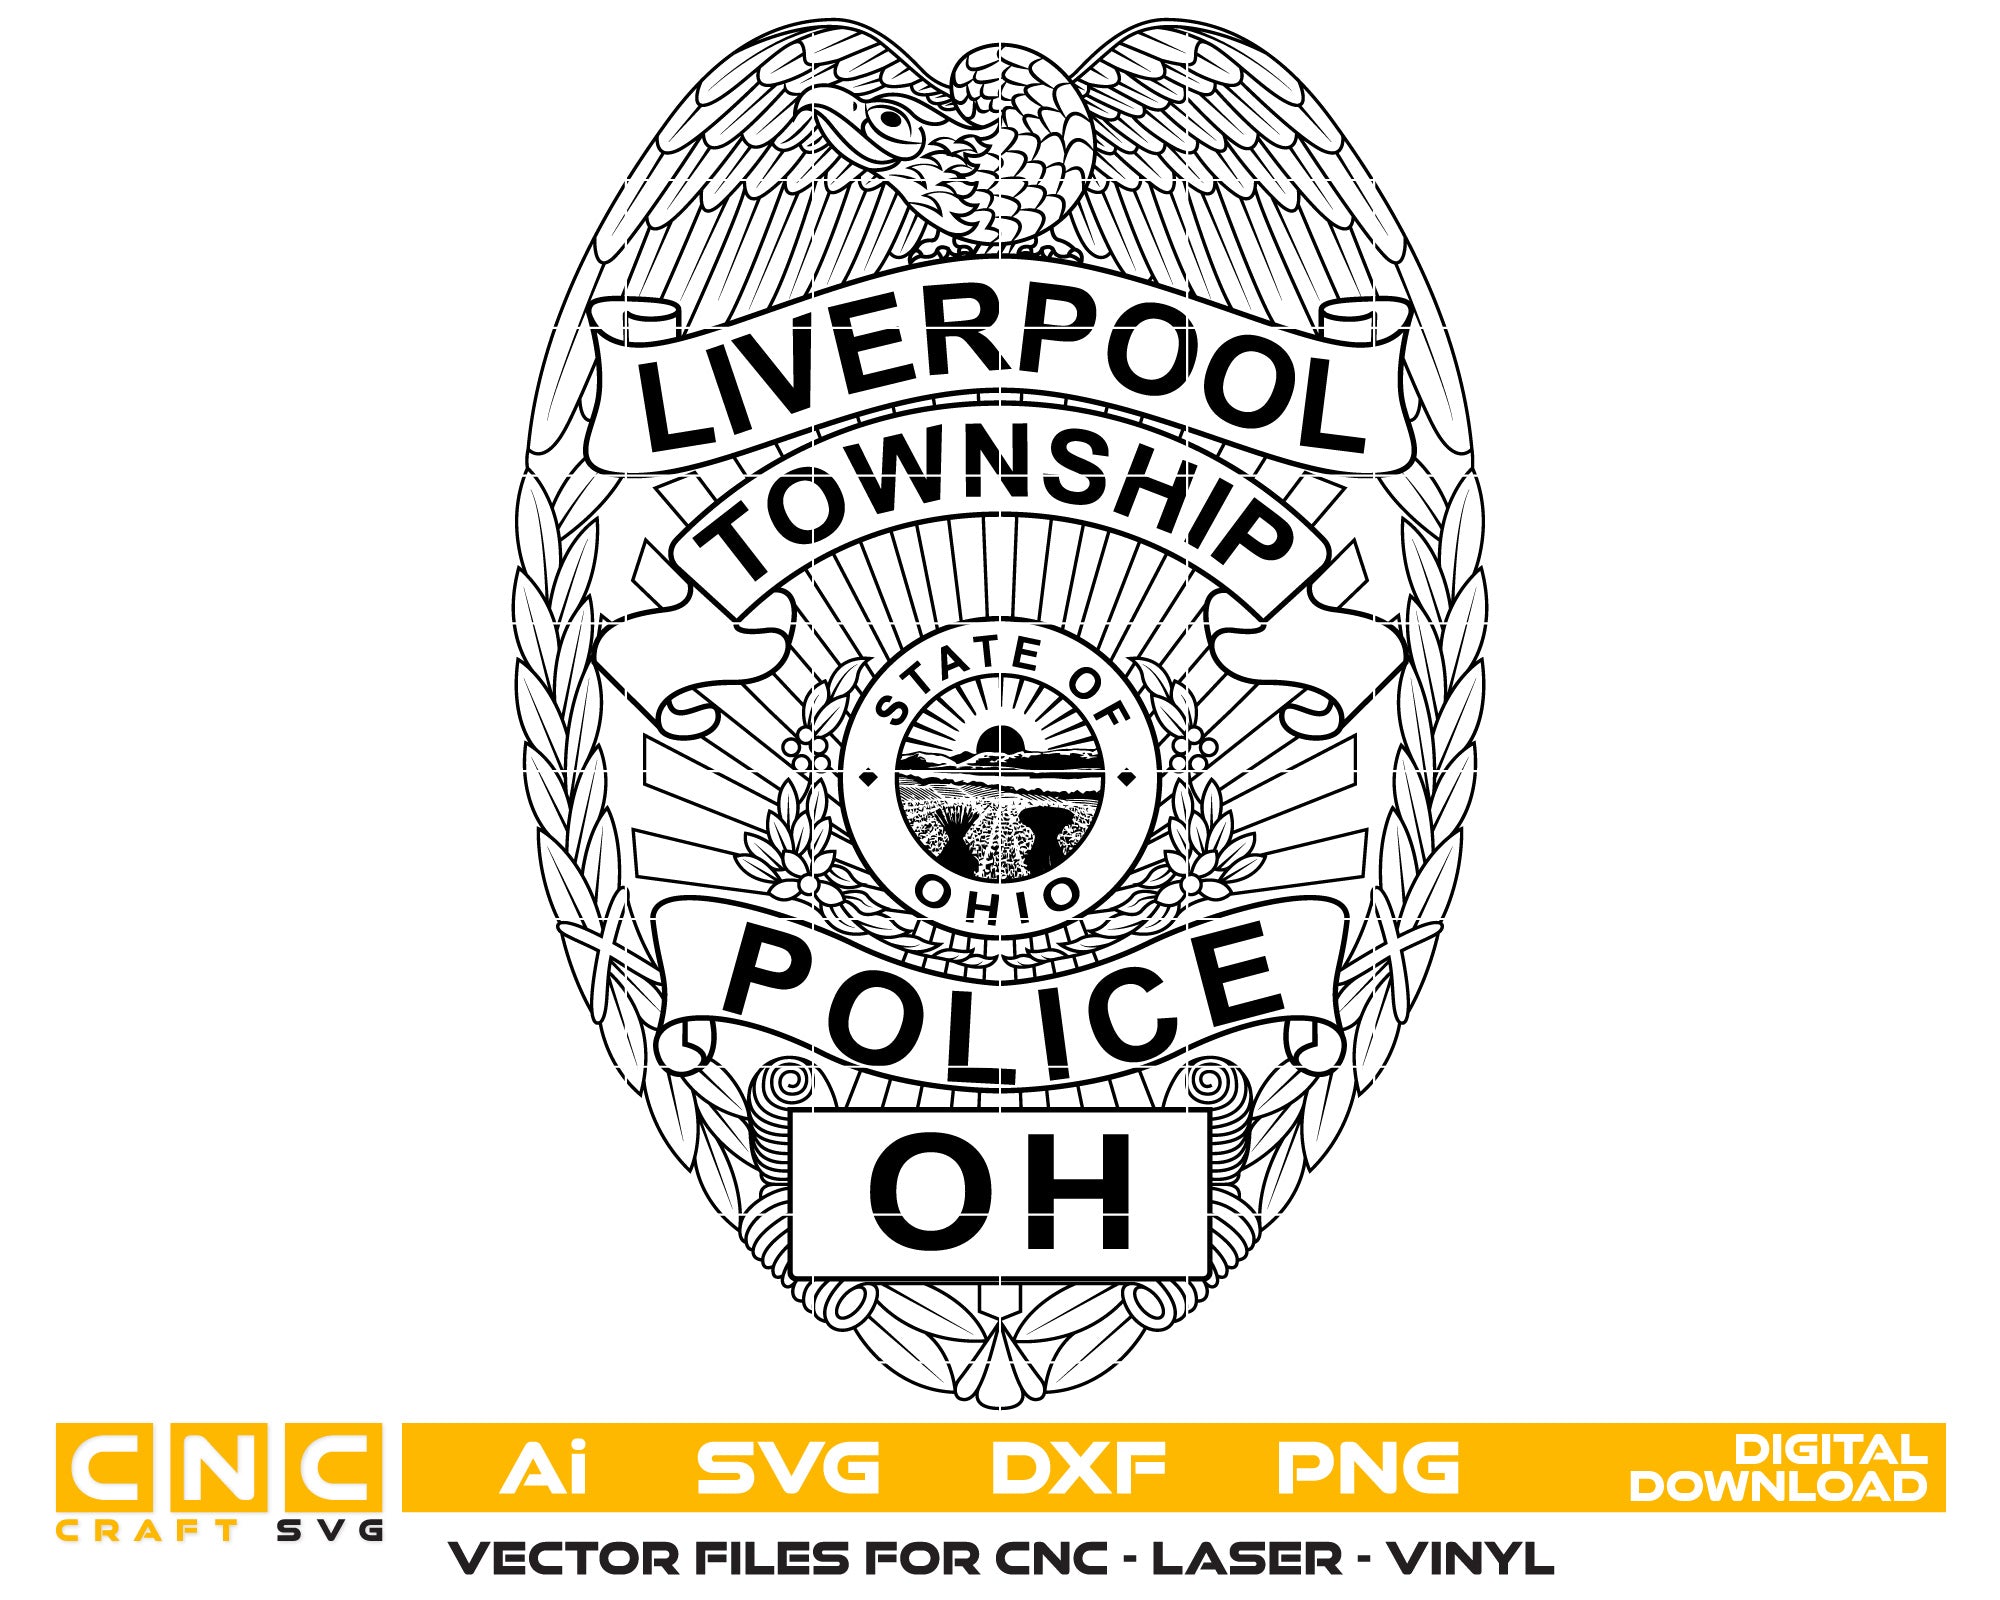 Liverpool Township Police Patch Vector Art, Ai,SVG, DXF, PNG, Digital Files